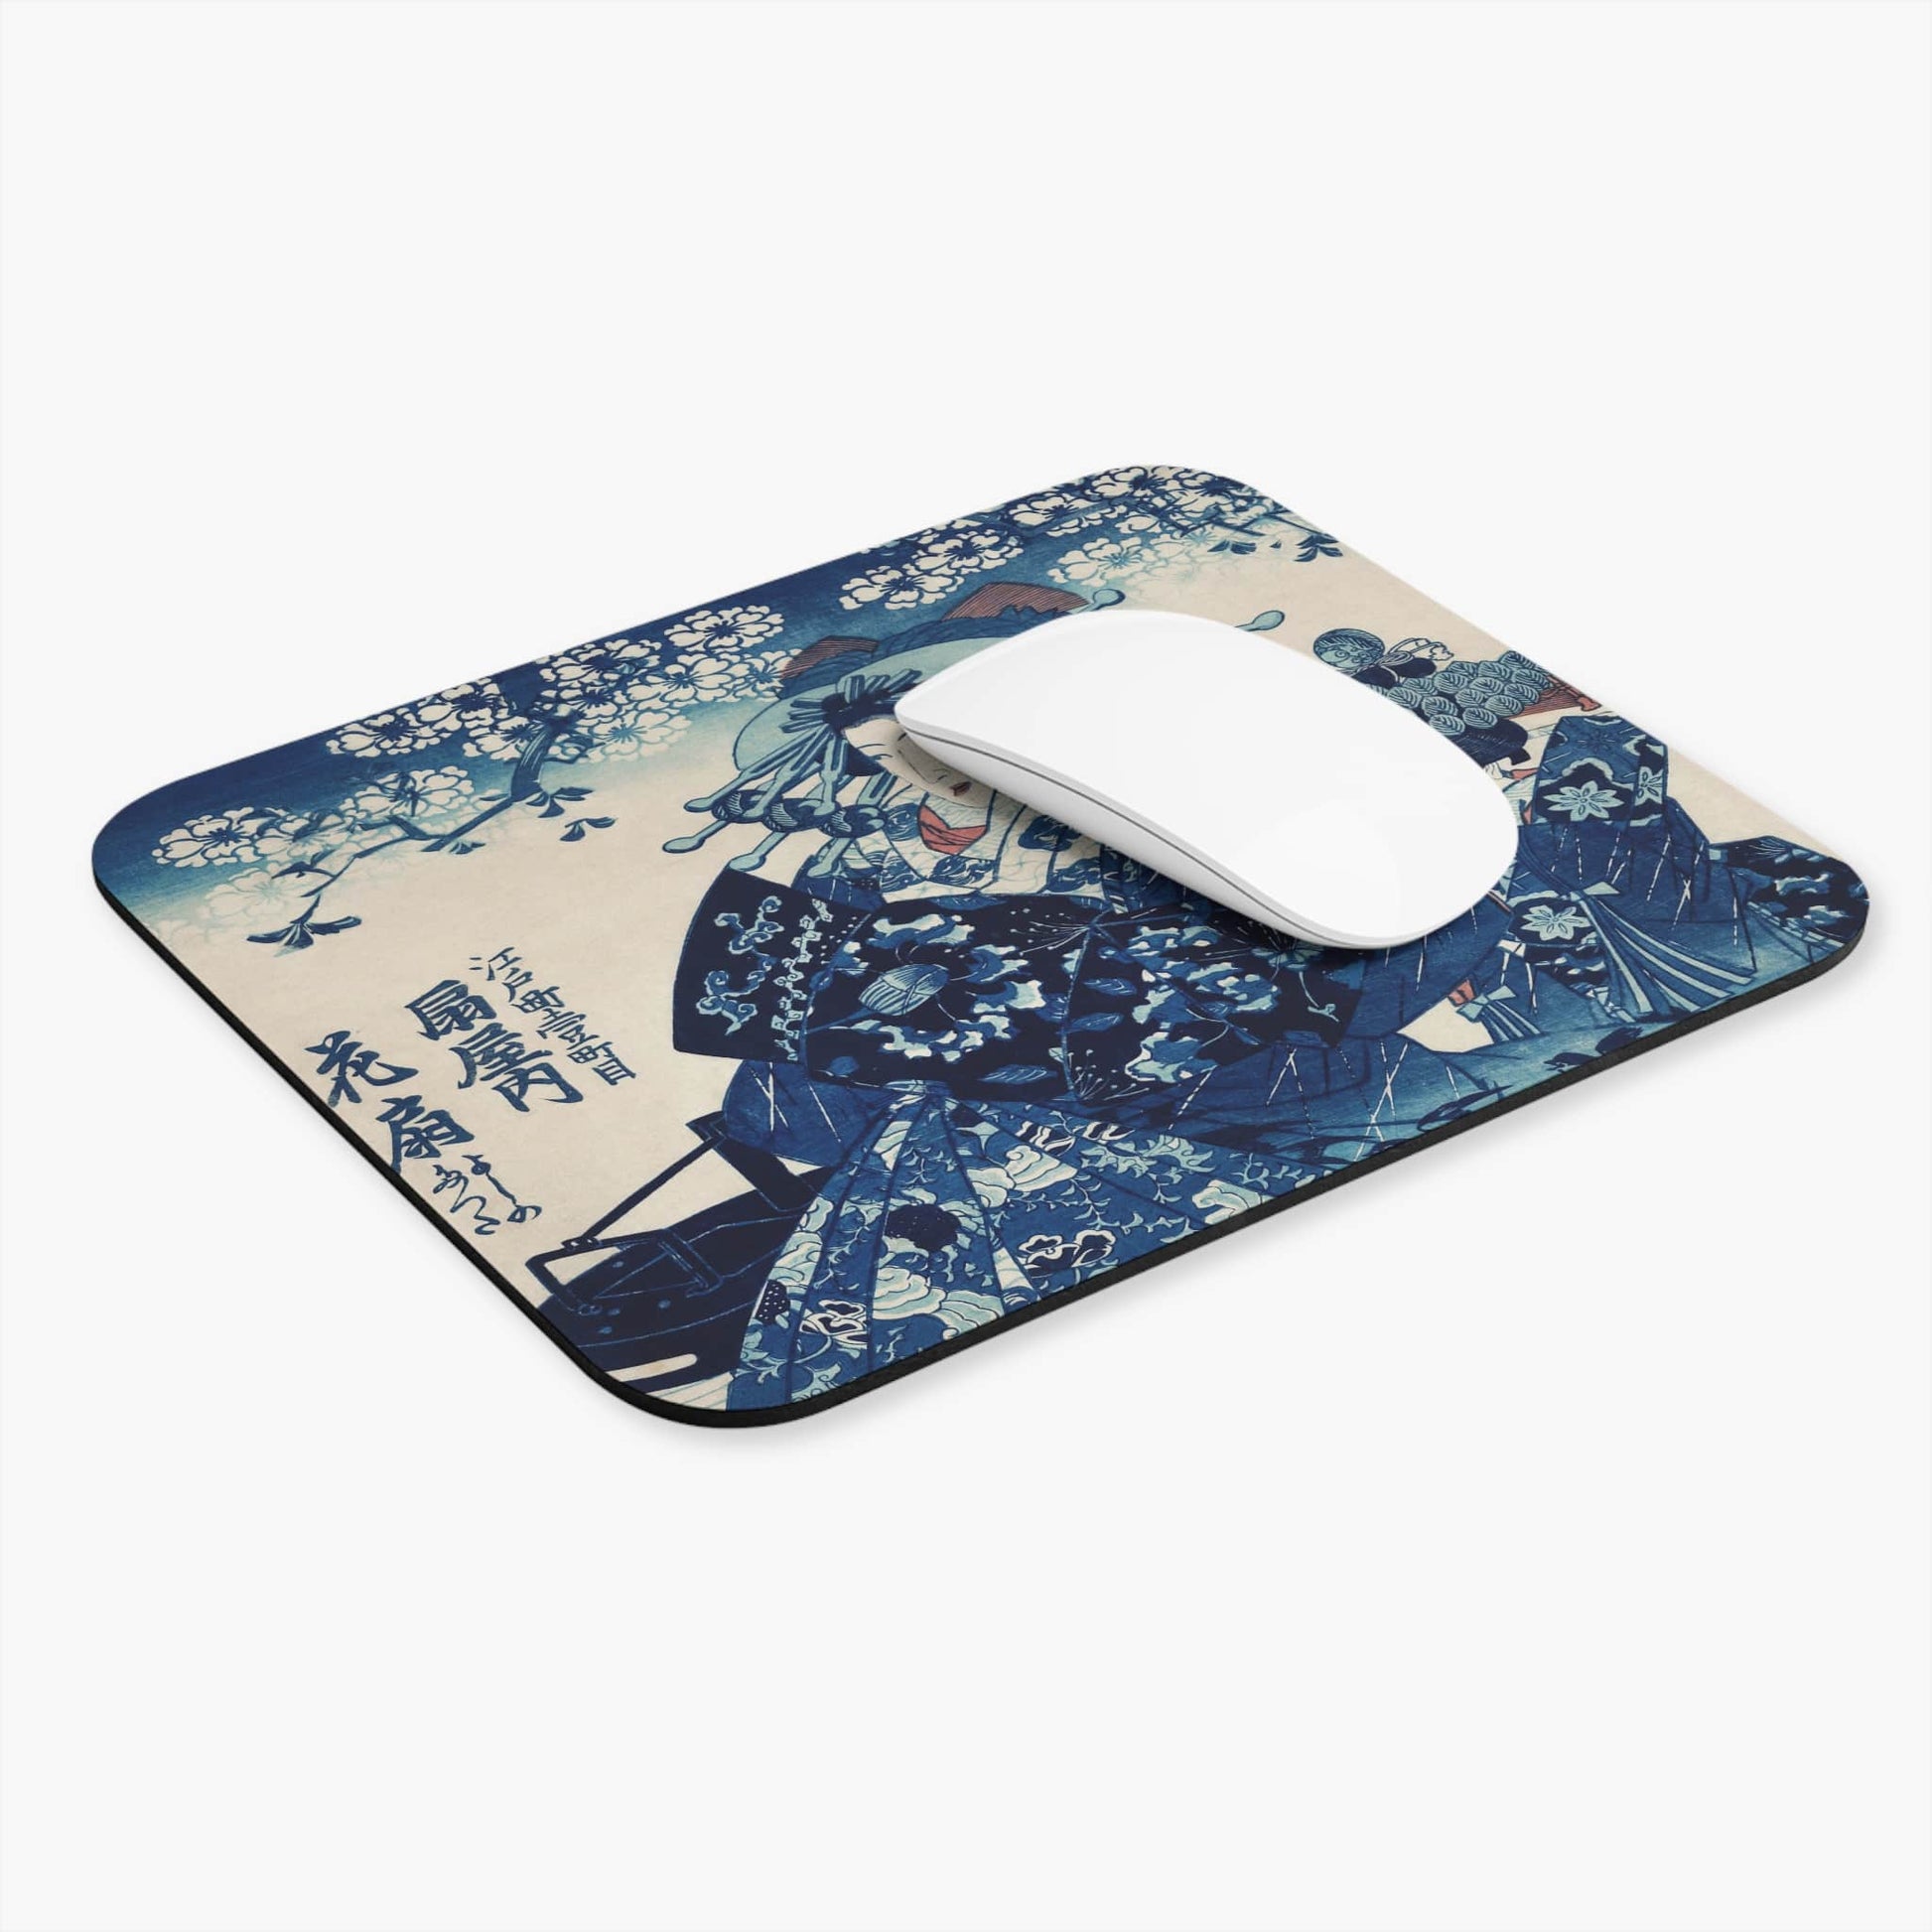 Japanese Woman Computer Desk Mouse Pad With White Mouse